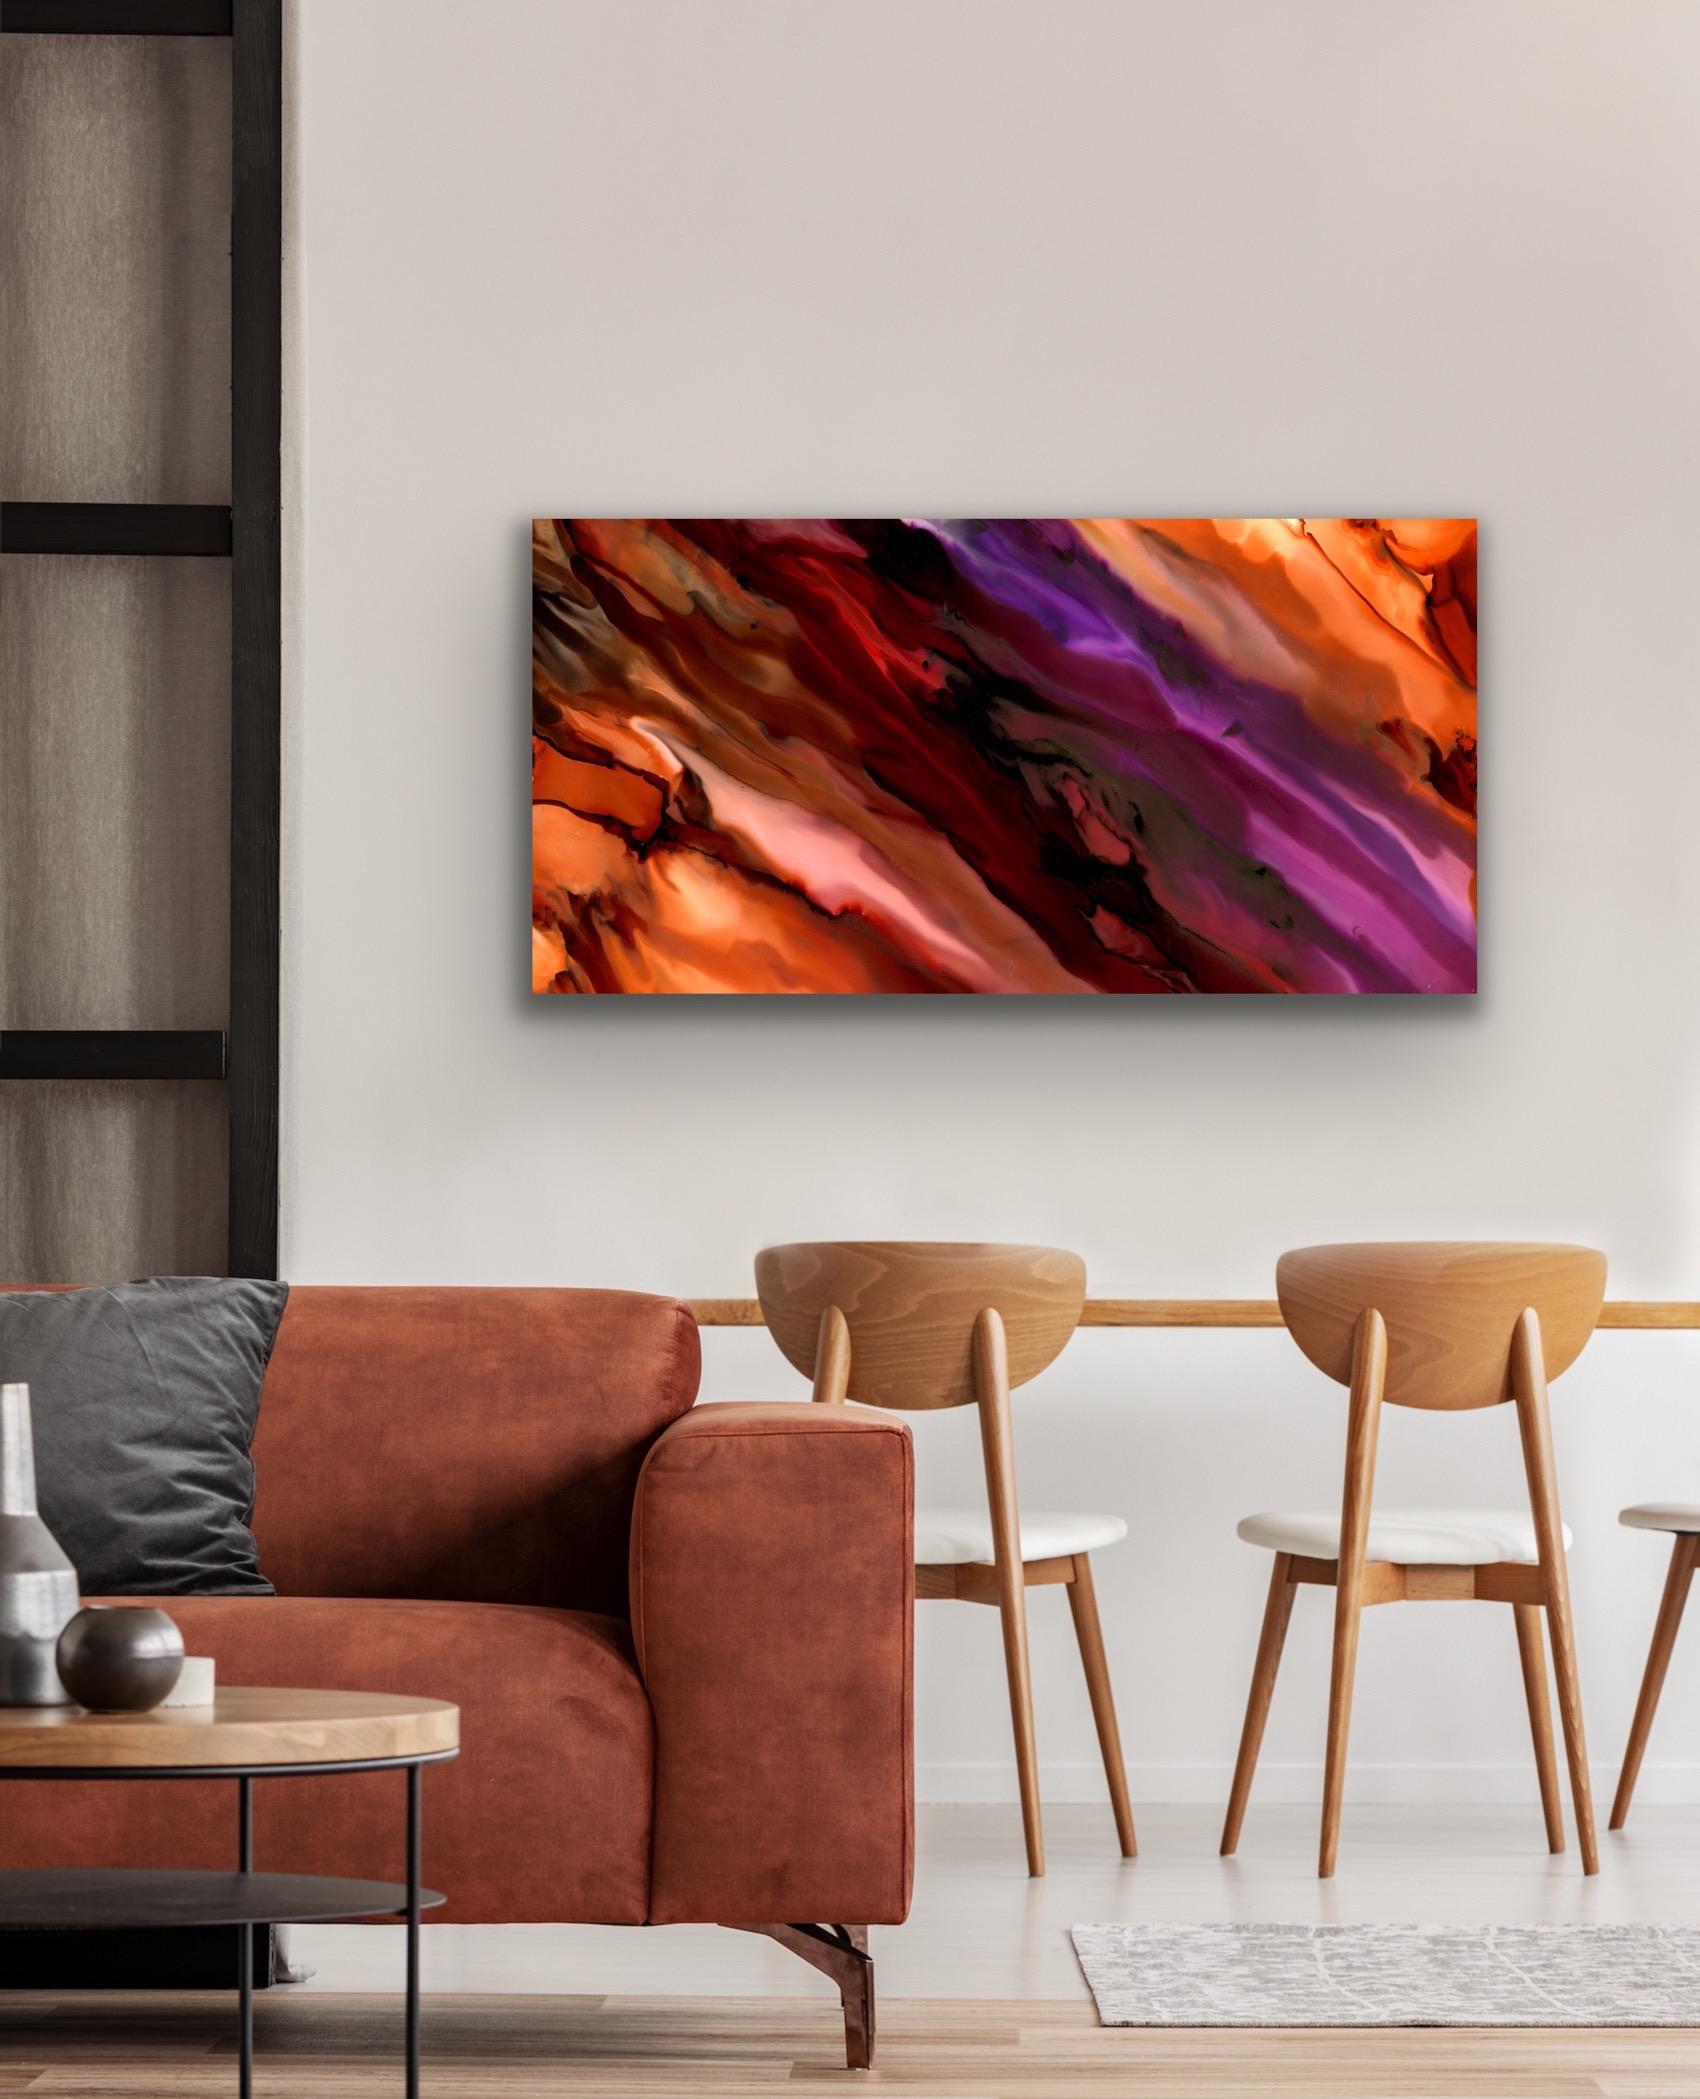 Large Abstract Modern Metal Wall Art Giclee Indoor Outdoor Decor by Sebastian 